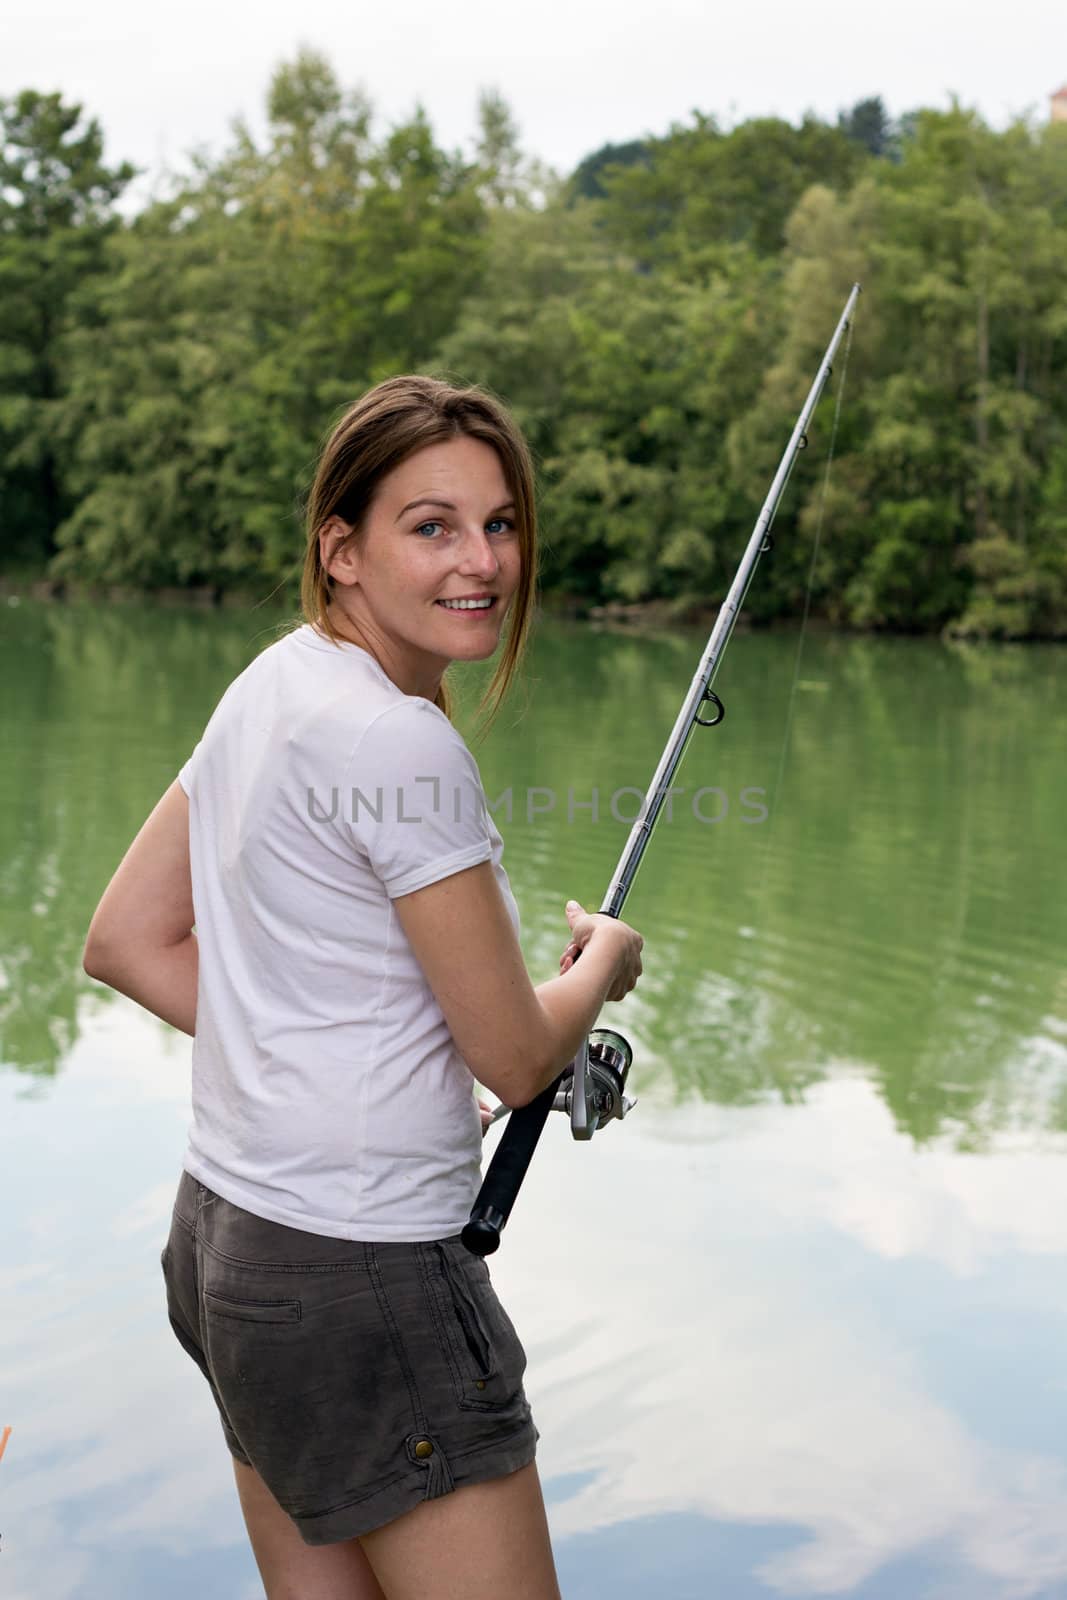 Brunette Woman Fishing at a lake with green water